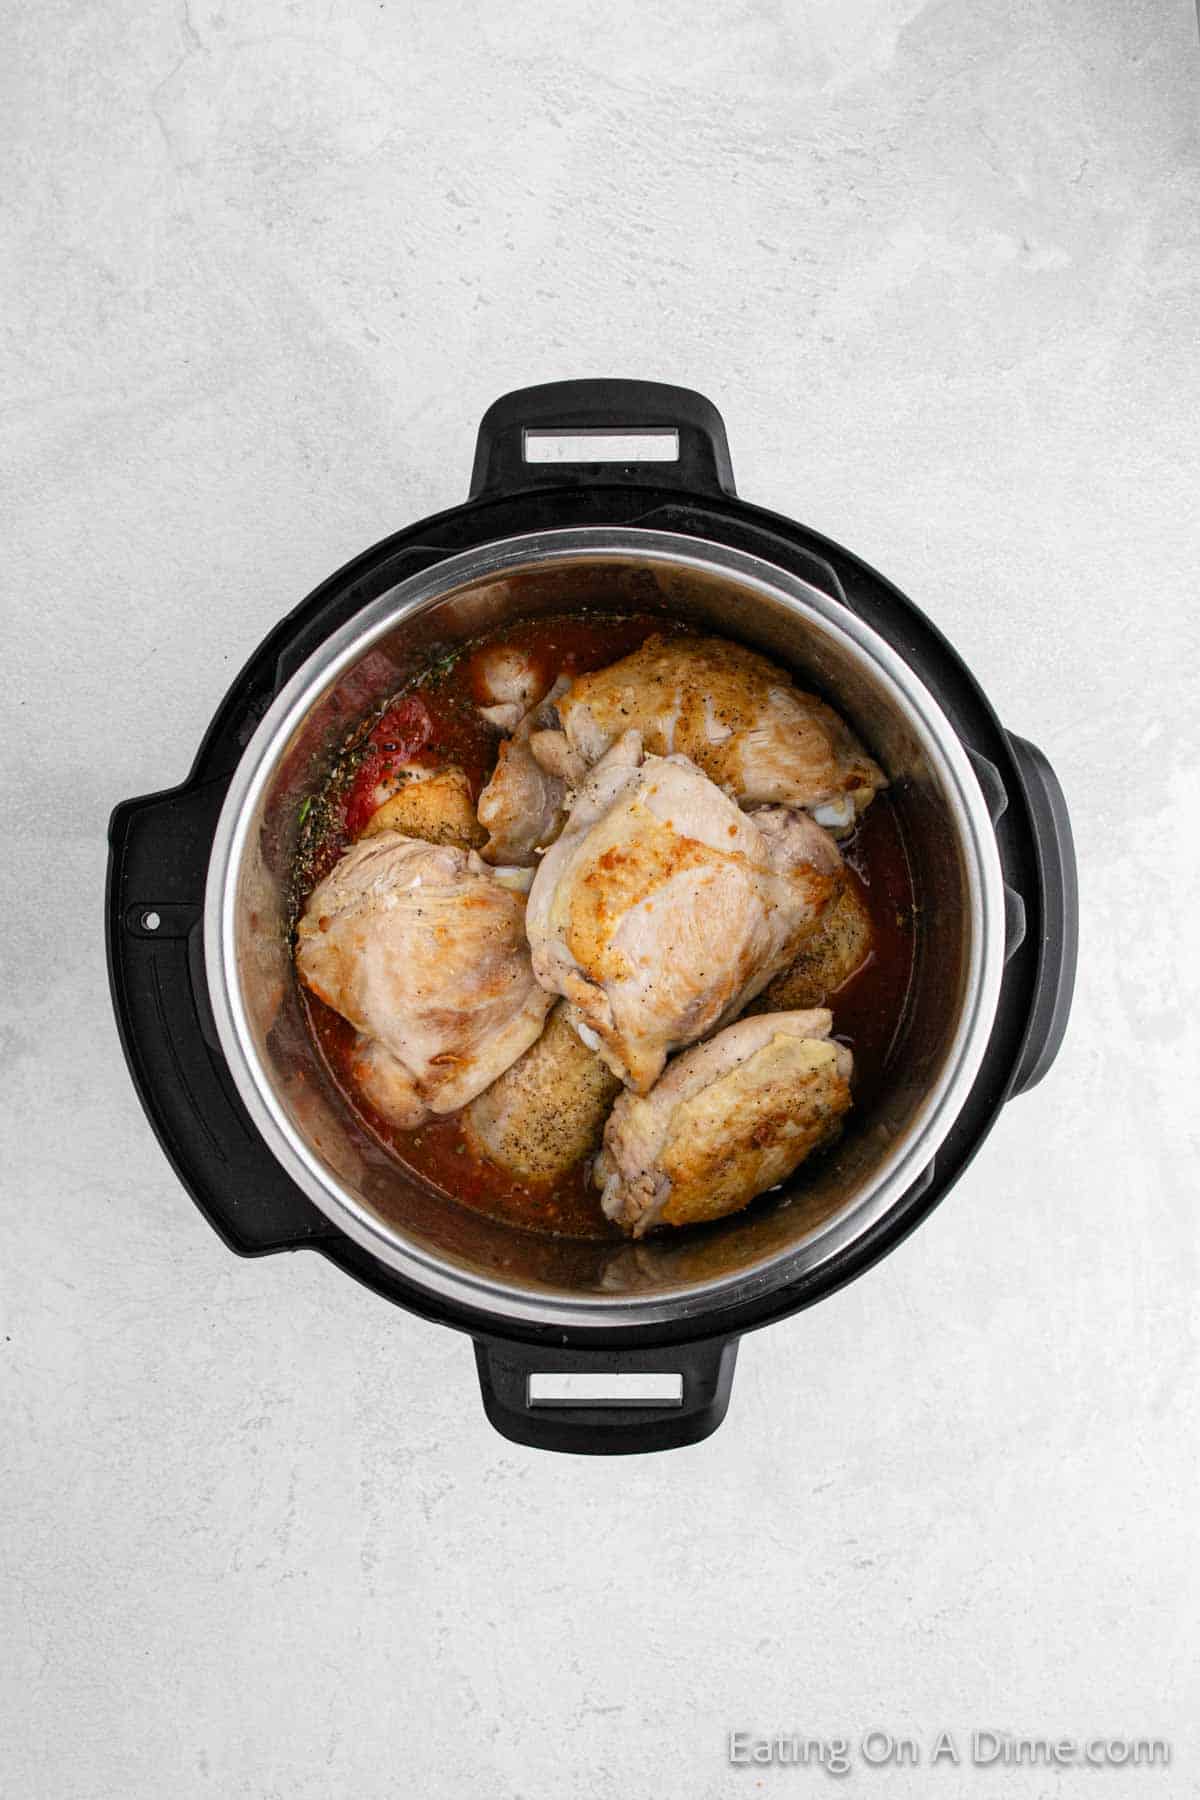 Topping the sauce with cooked chicken in the instant pot